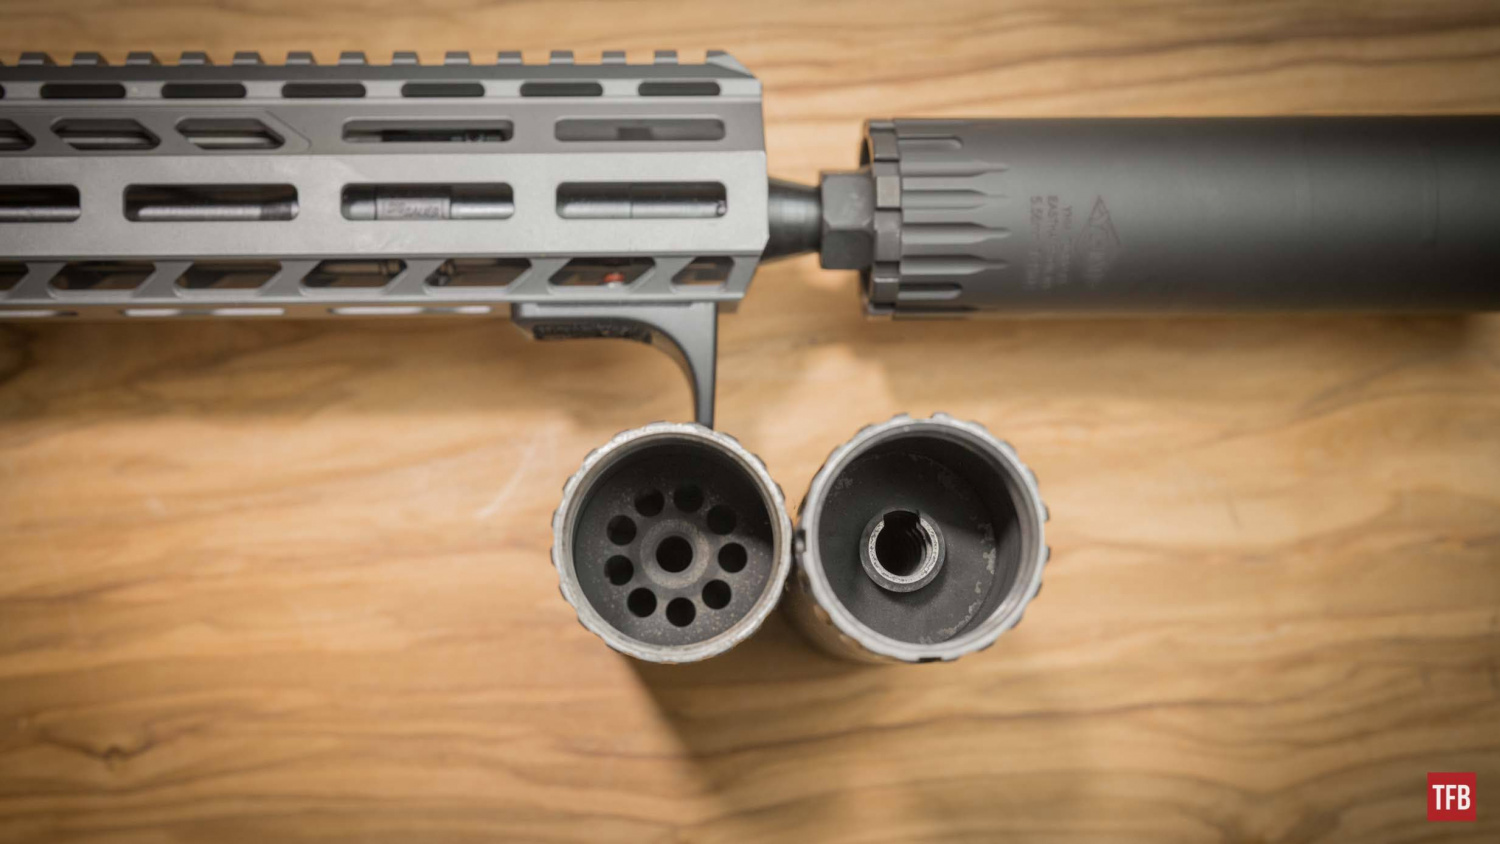 SILENCER SATURDAY #257: Limit TOXIC EXPOSURE - The New YHM Turbo T3 Suppressor